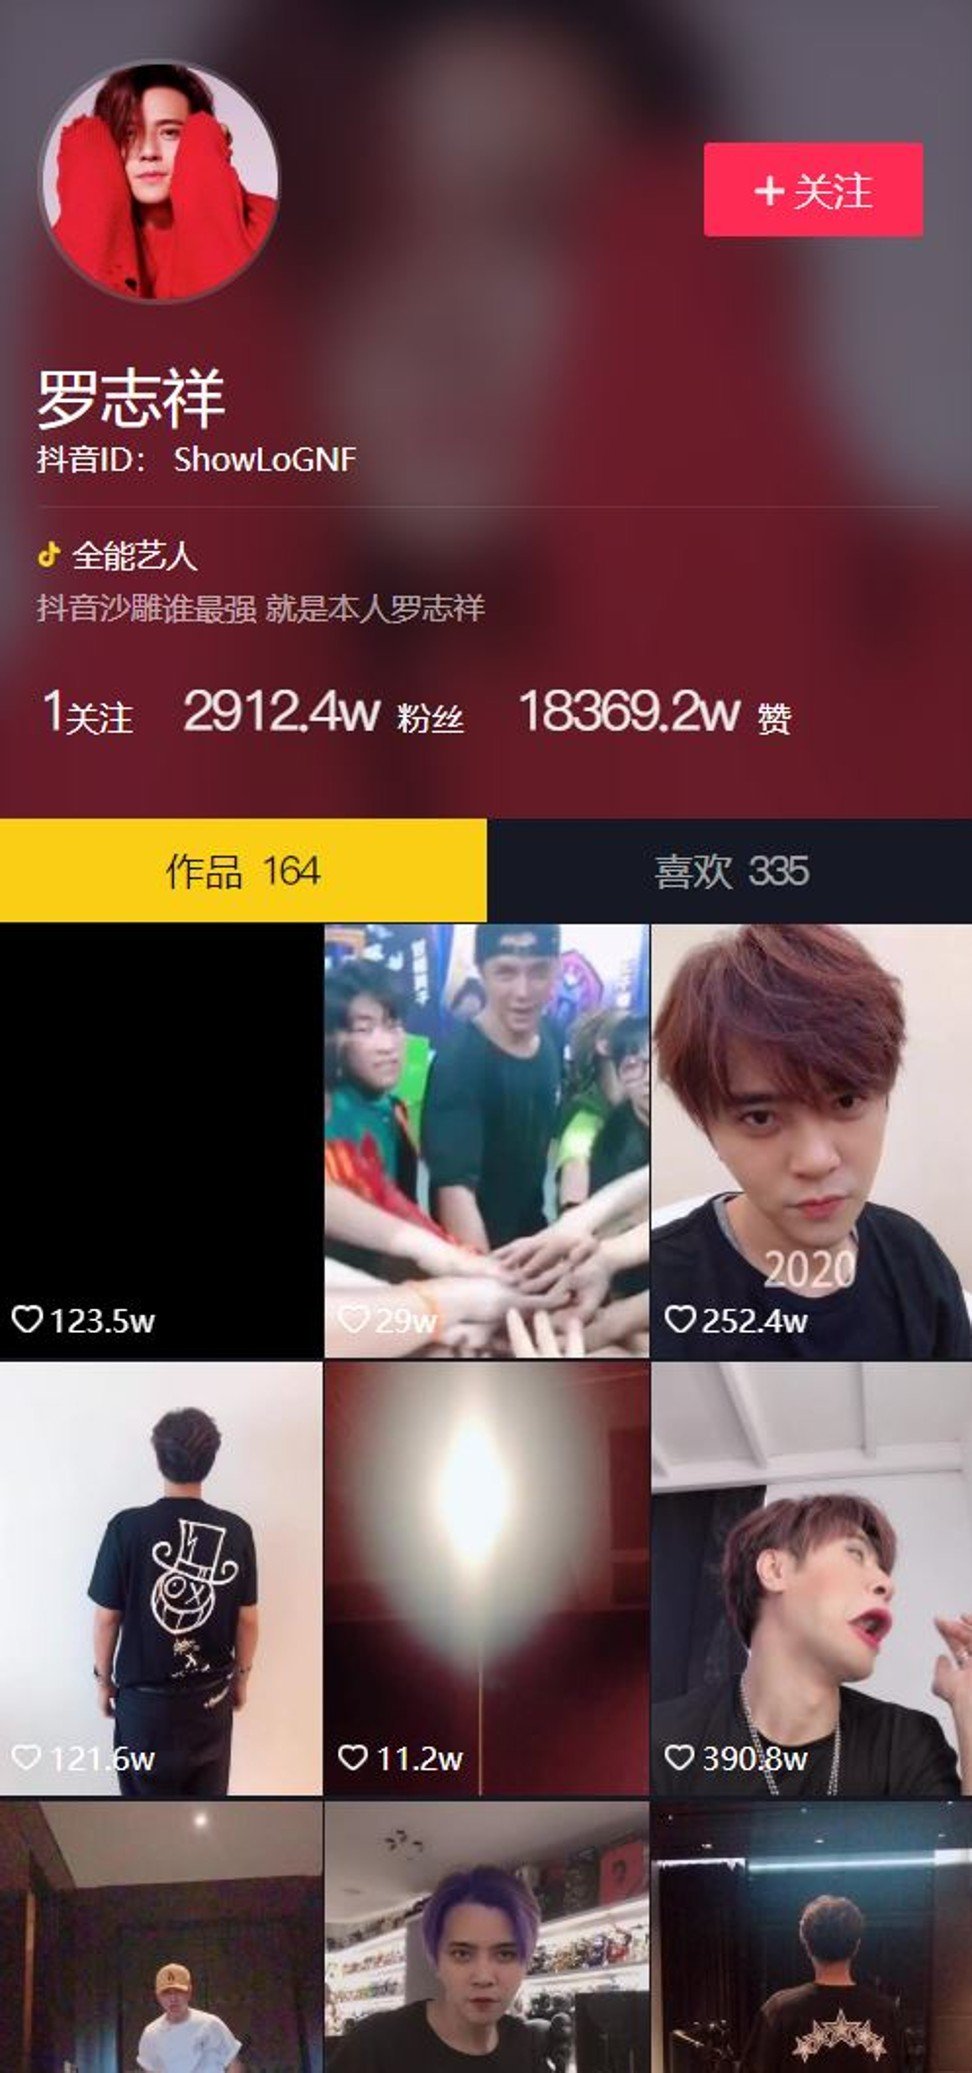 Taiwanese singer Show Lo’s Douyin page.